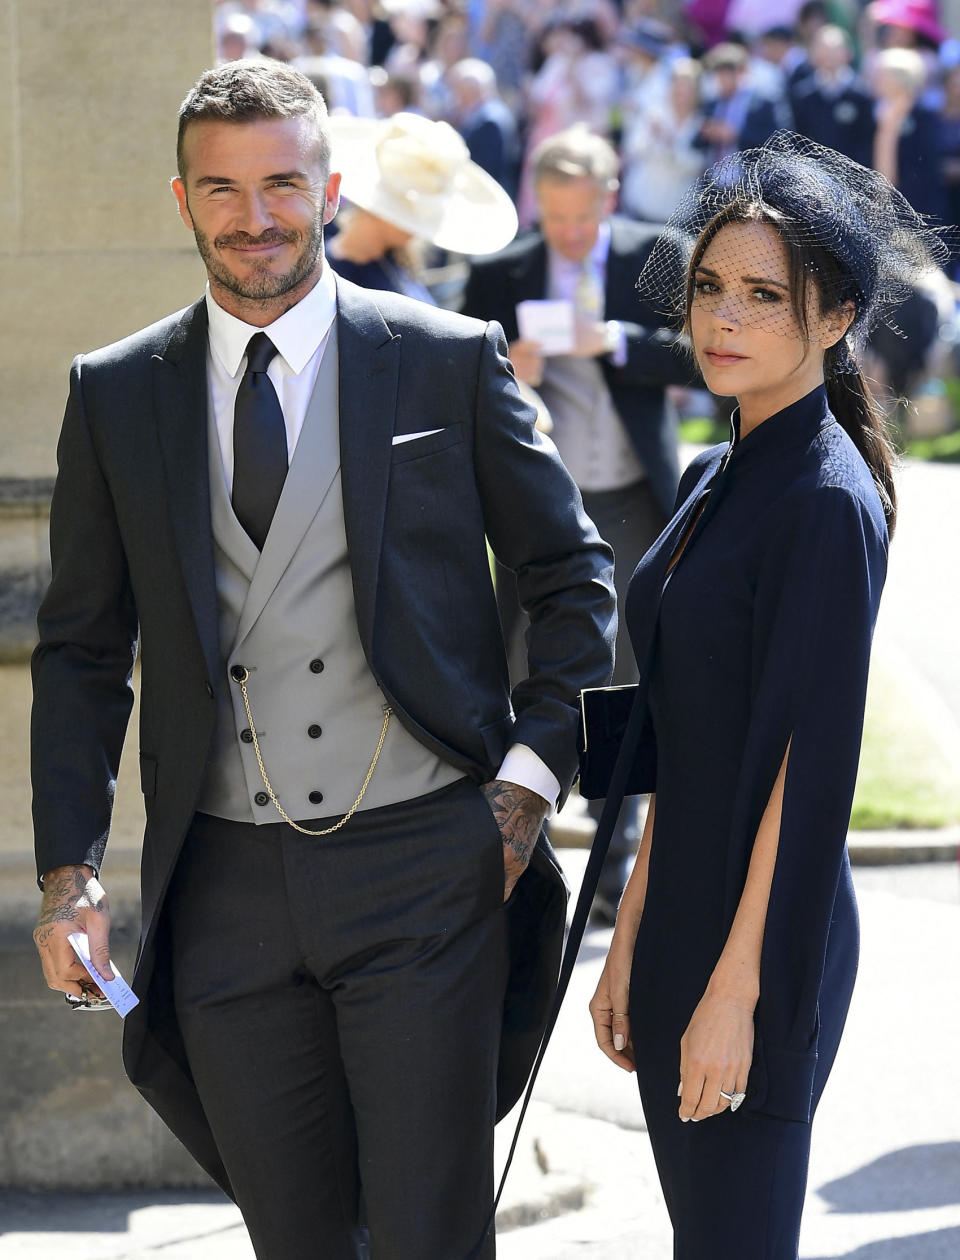 David and Victoria Beckham at Prince Harry and Meghan's wedding in 2018